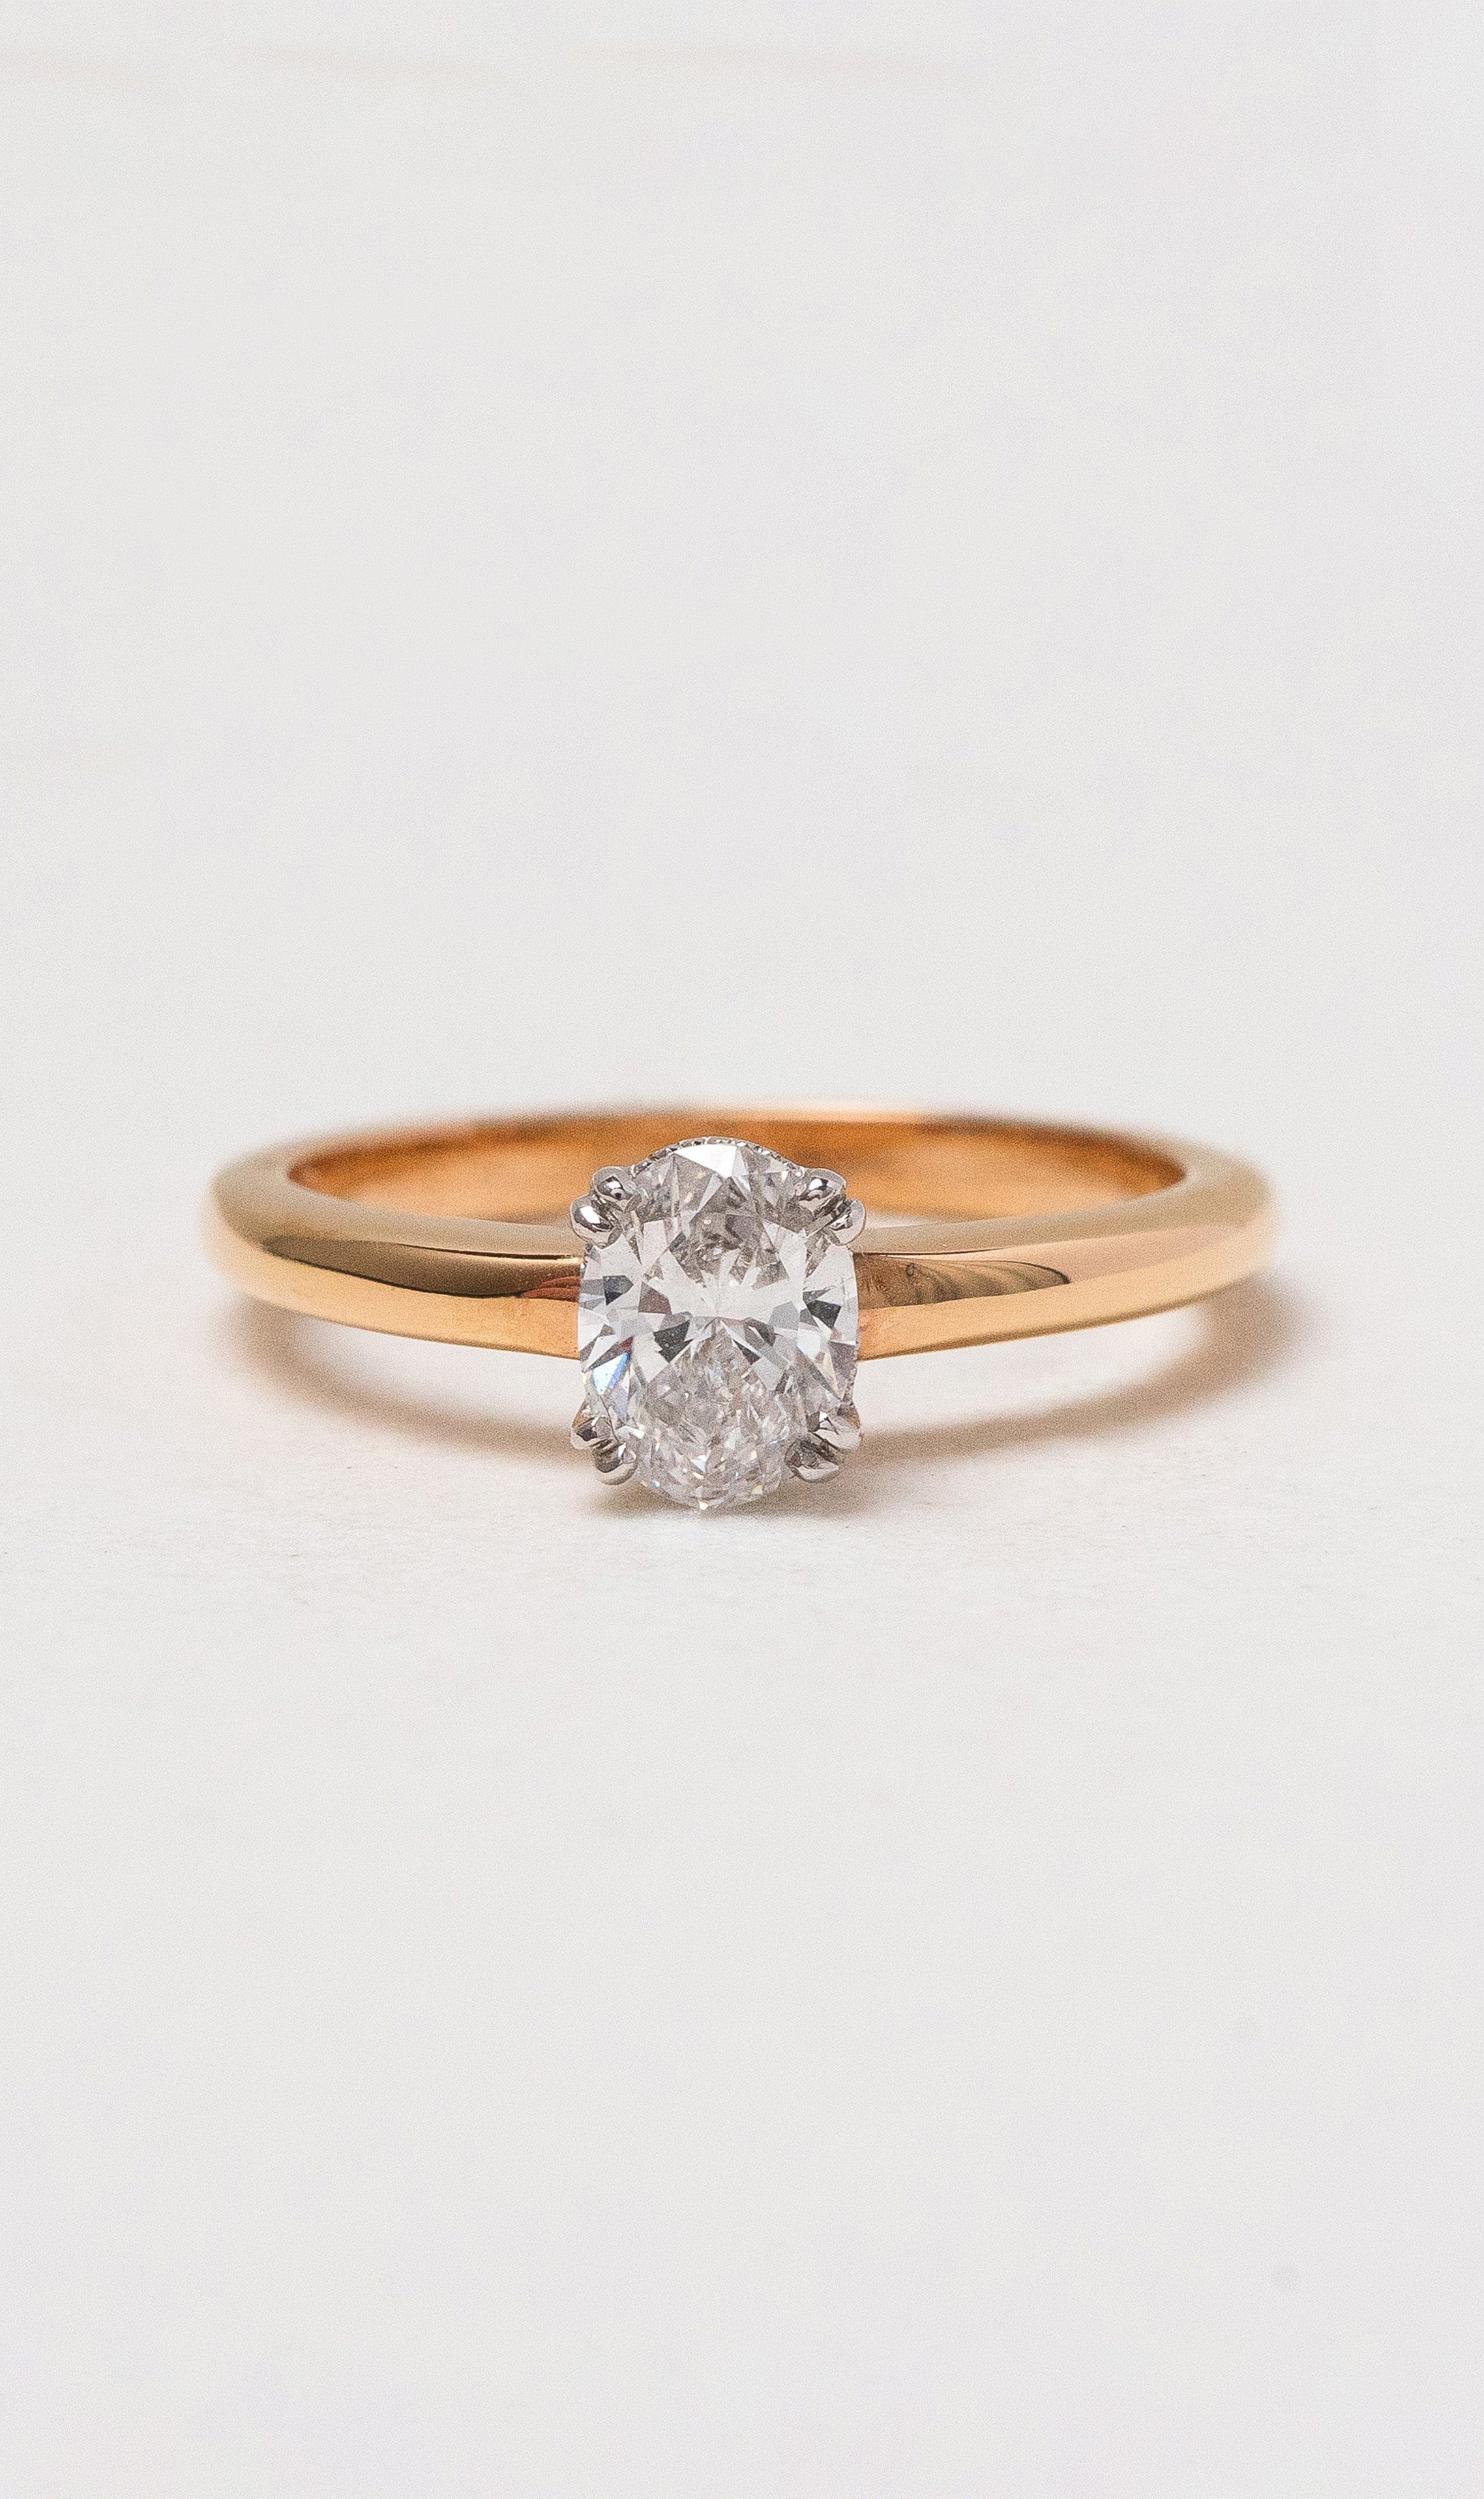 Hogans Family Jewellers 18K RWG Oval Solitaire Diamond Ring